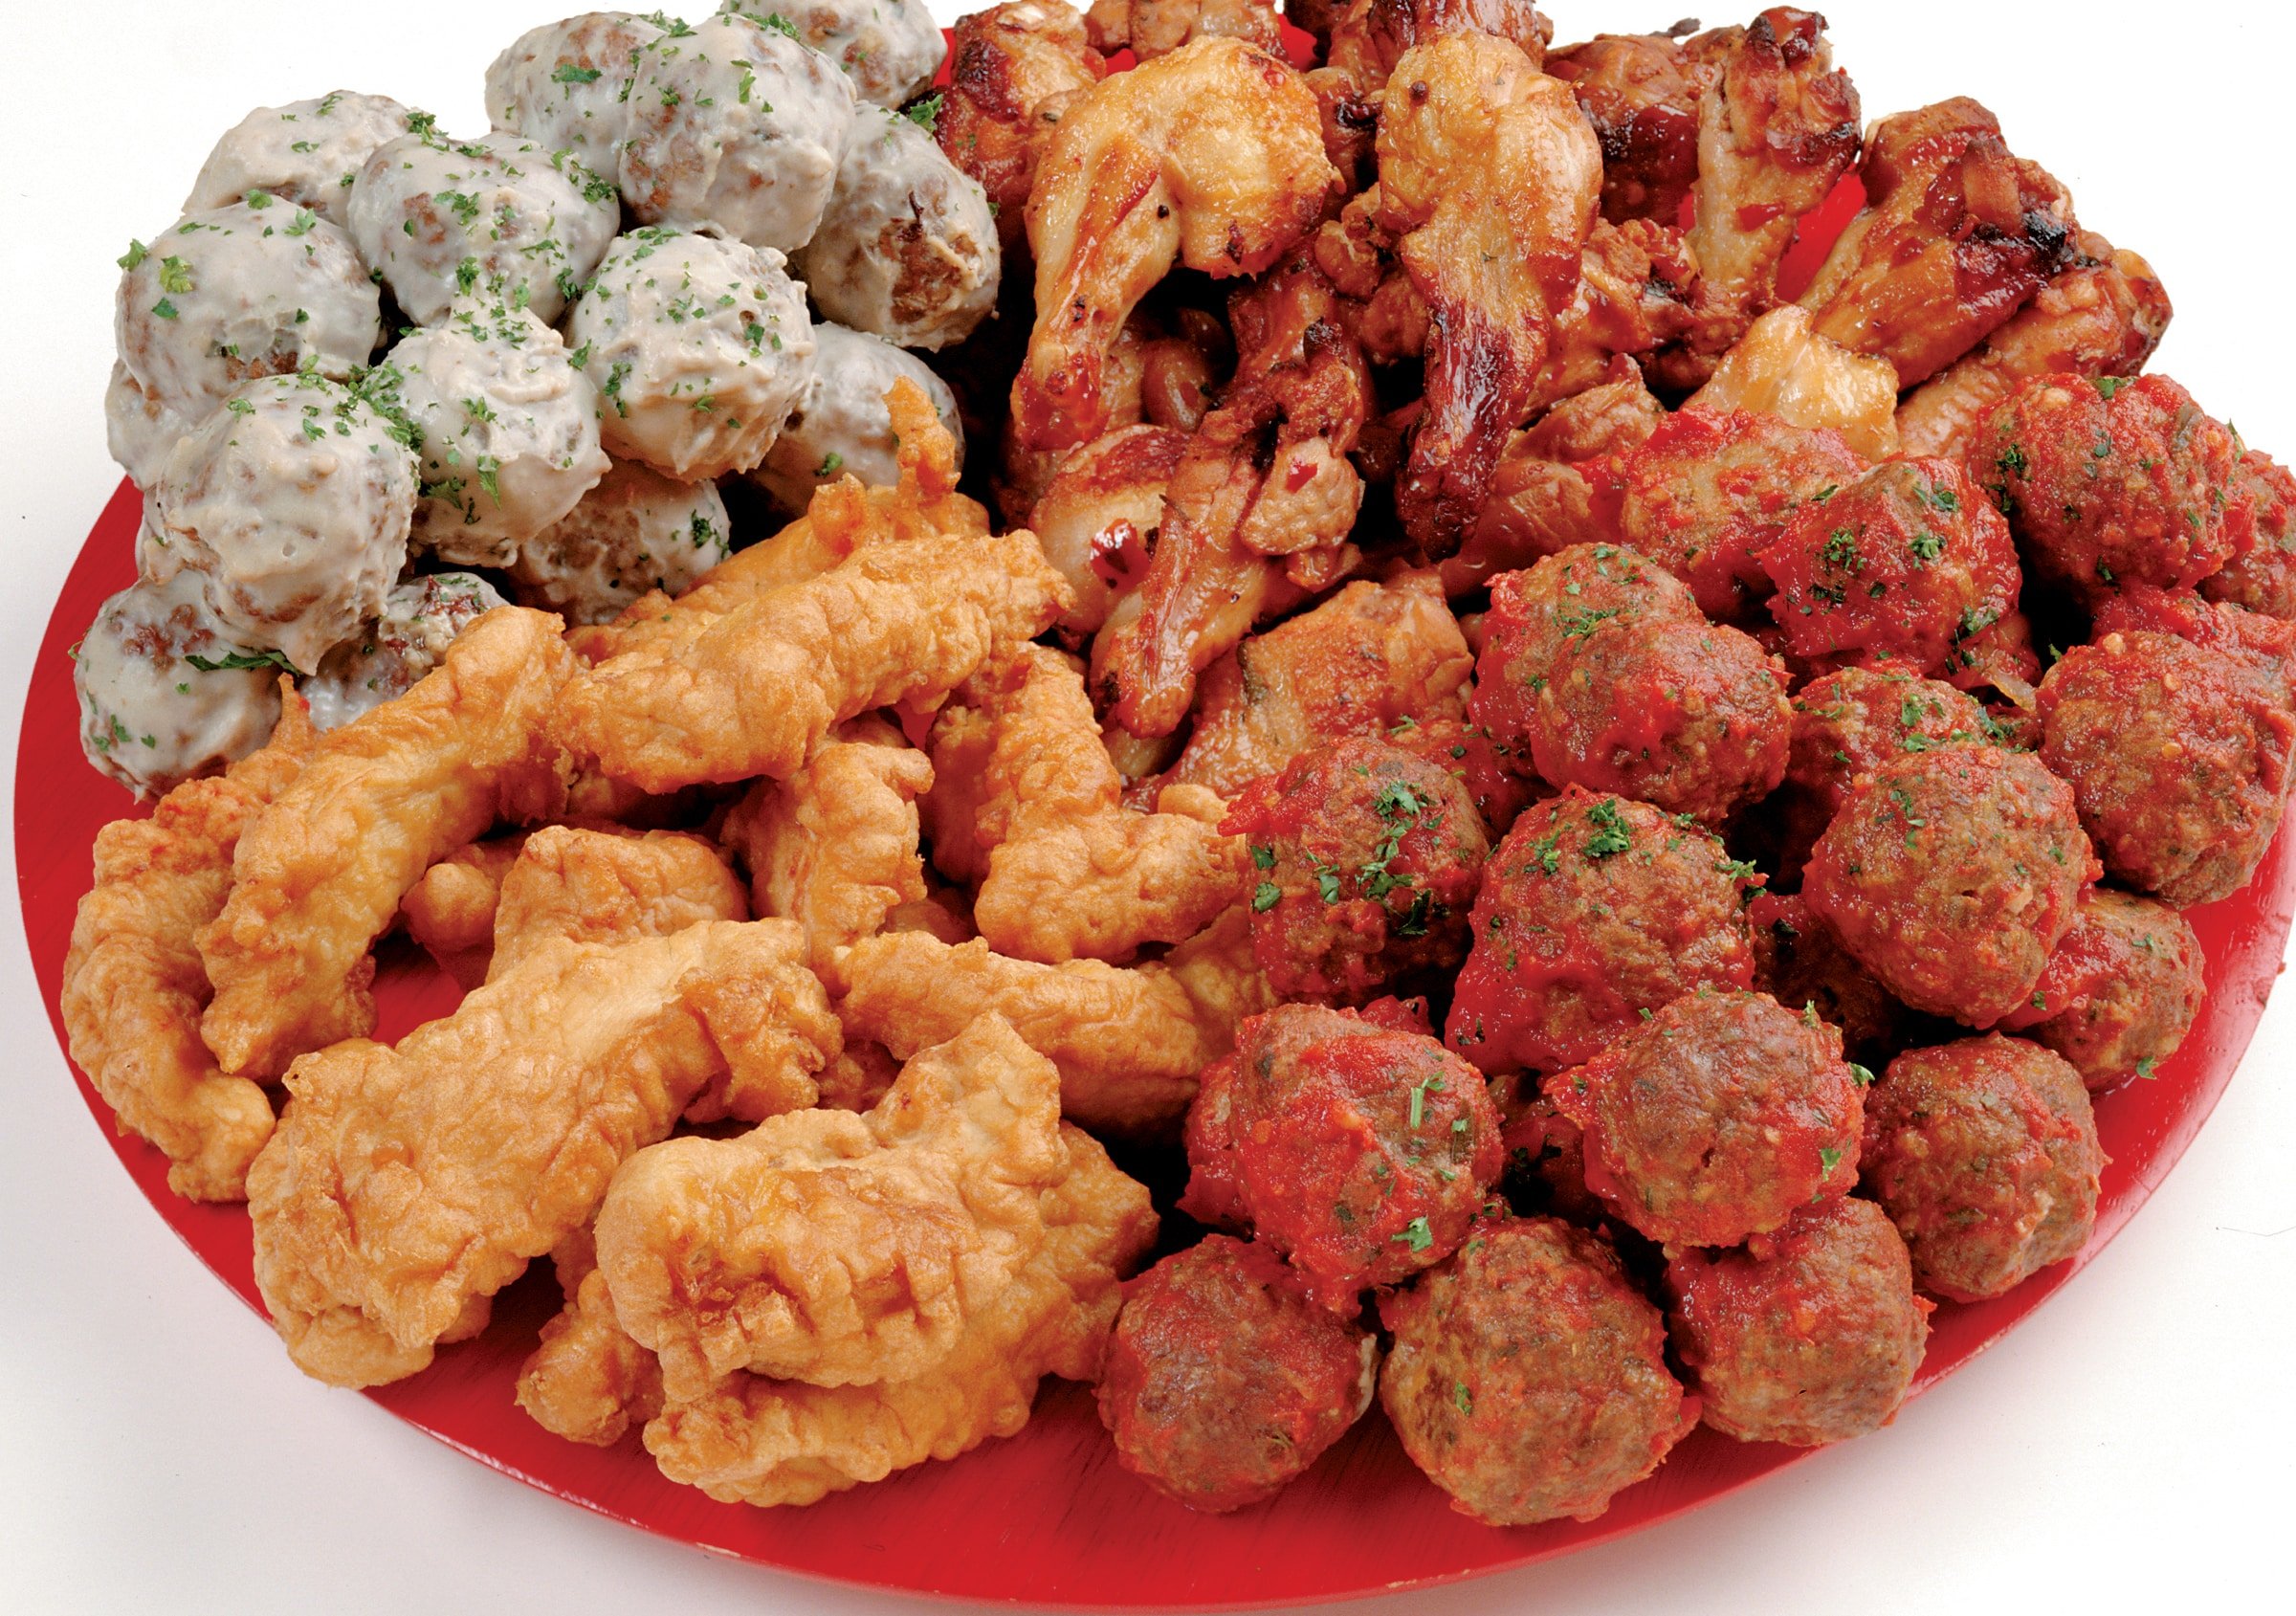 Assorted Meatballs & Chicken Wings Food Picture